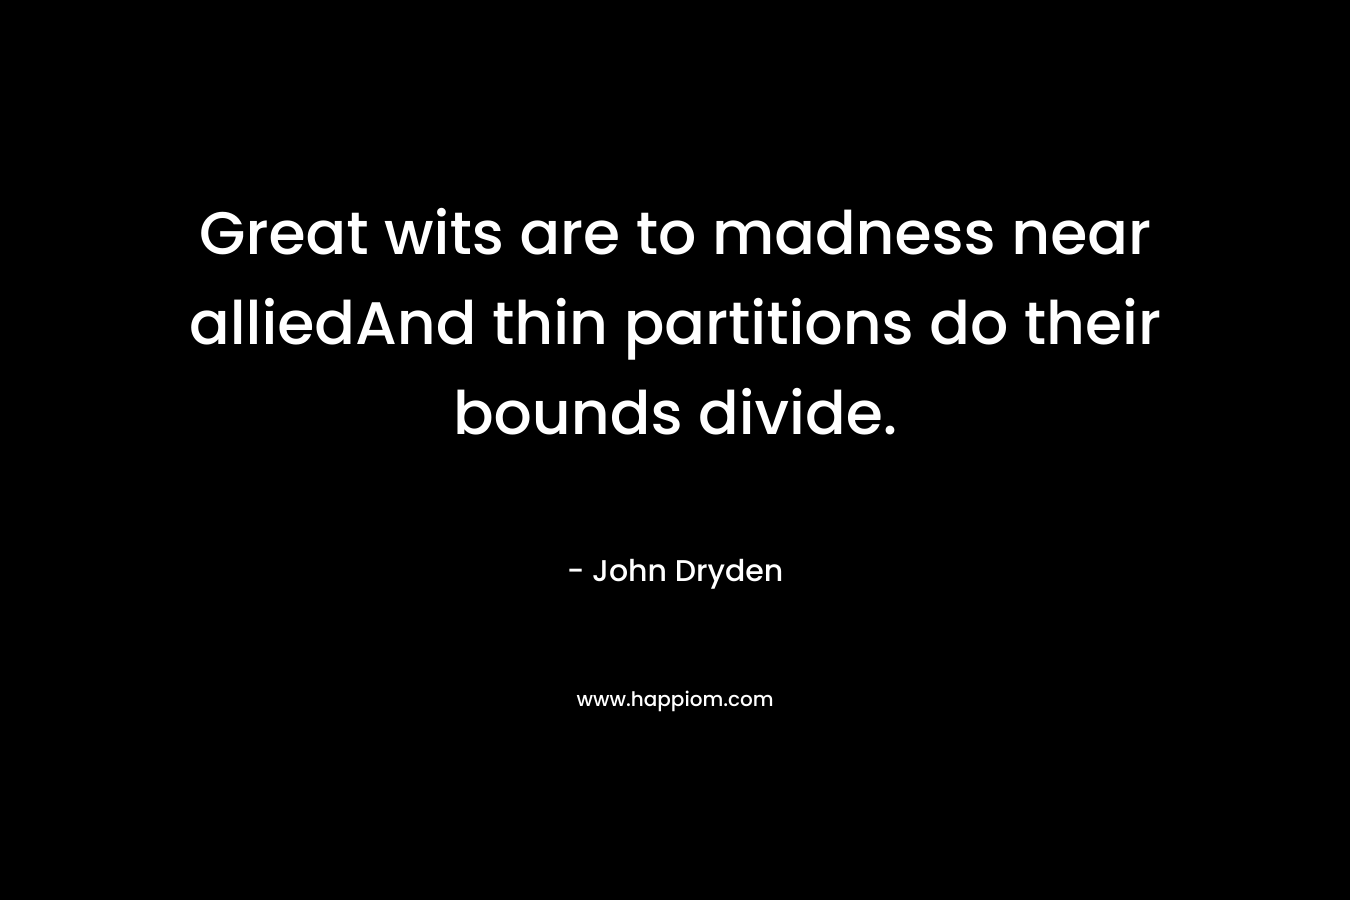 Great wits are to madness near alliedAnd thin partitions do their bounds divide. – John Dryden